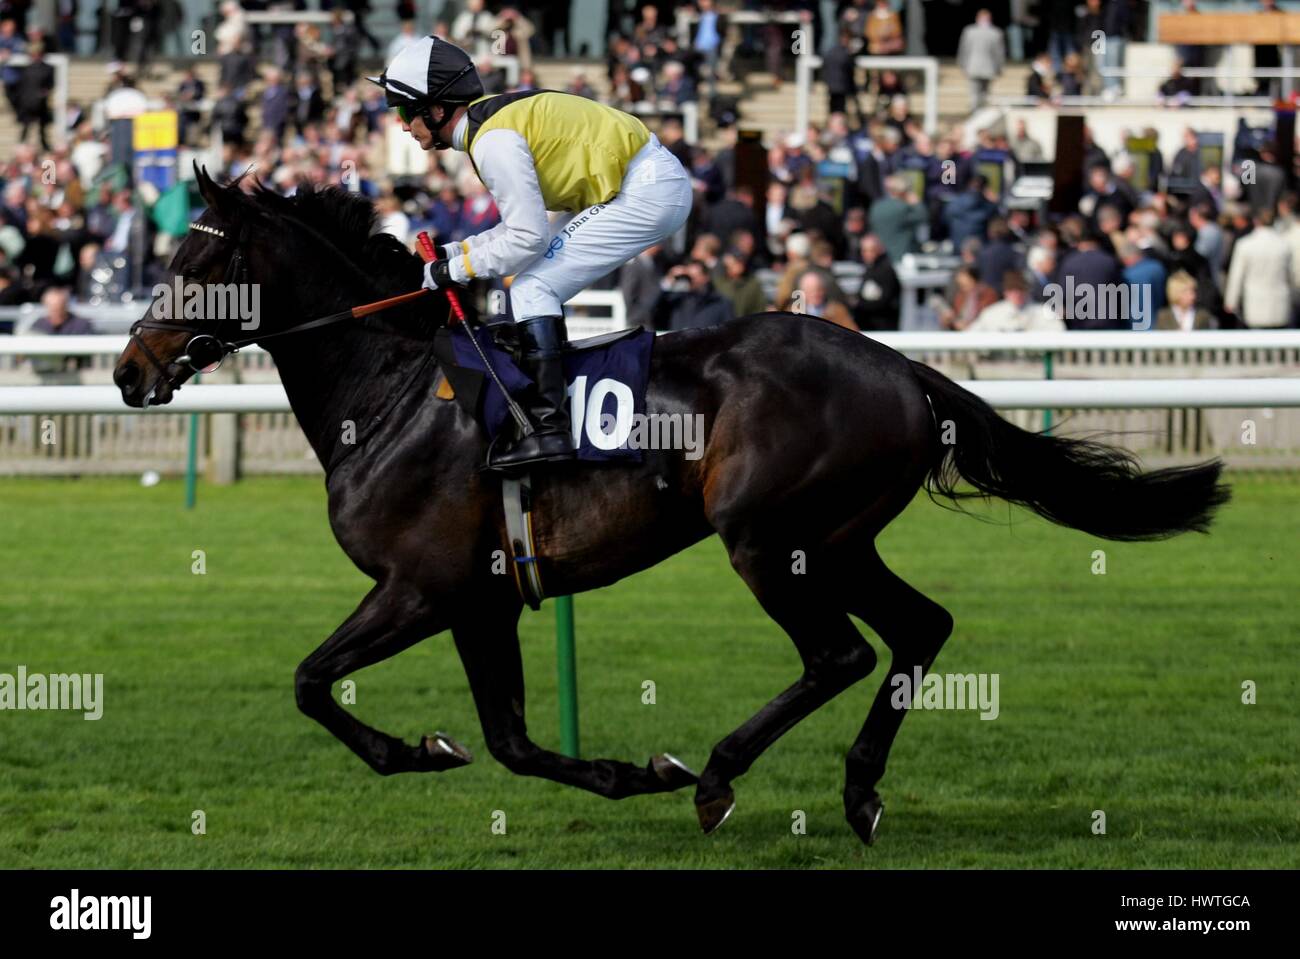 ONE PUTRA RIDDEN BY P.ROBINSON ROWLEY MILE COURSE NEWMARKET ENGLAND 18 April 2006 Stock Photo